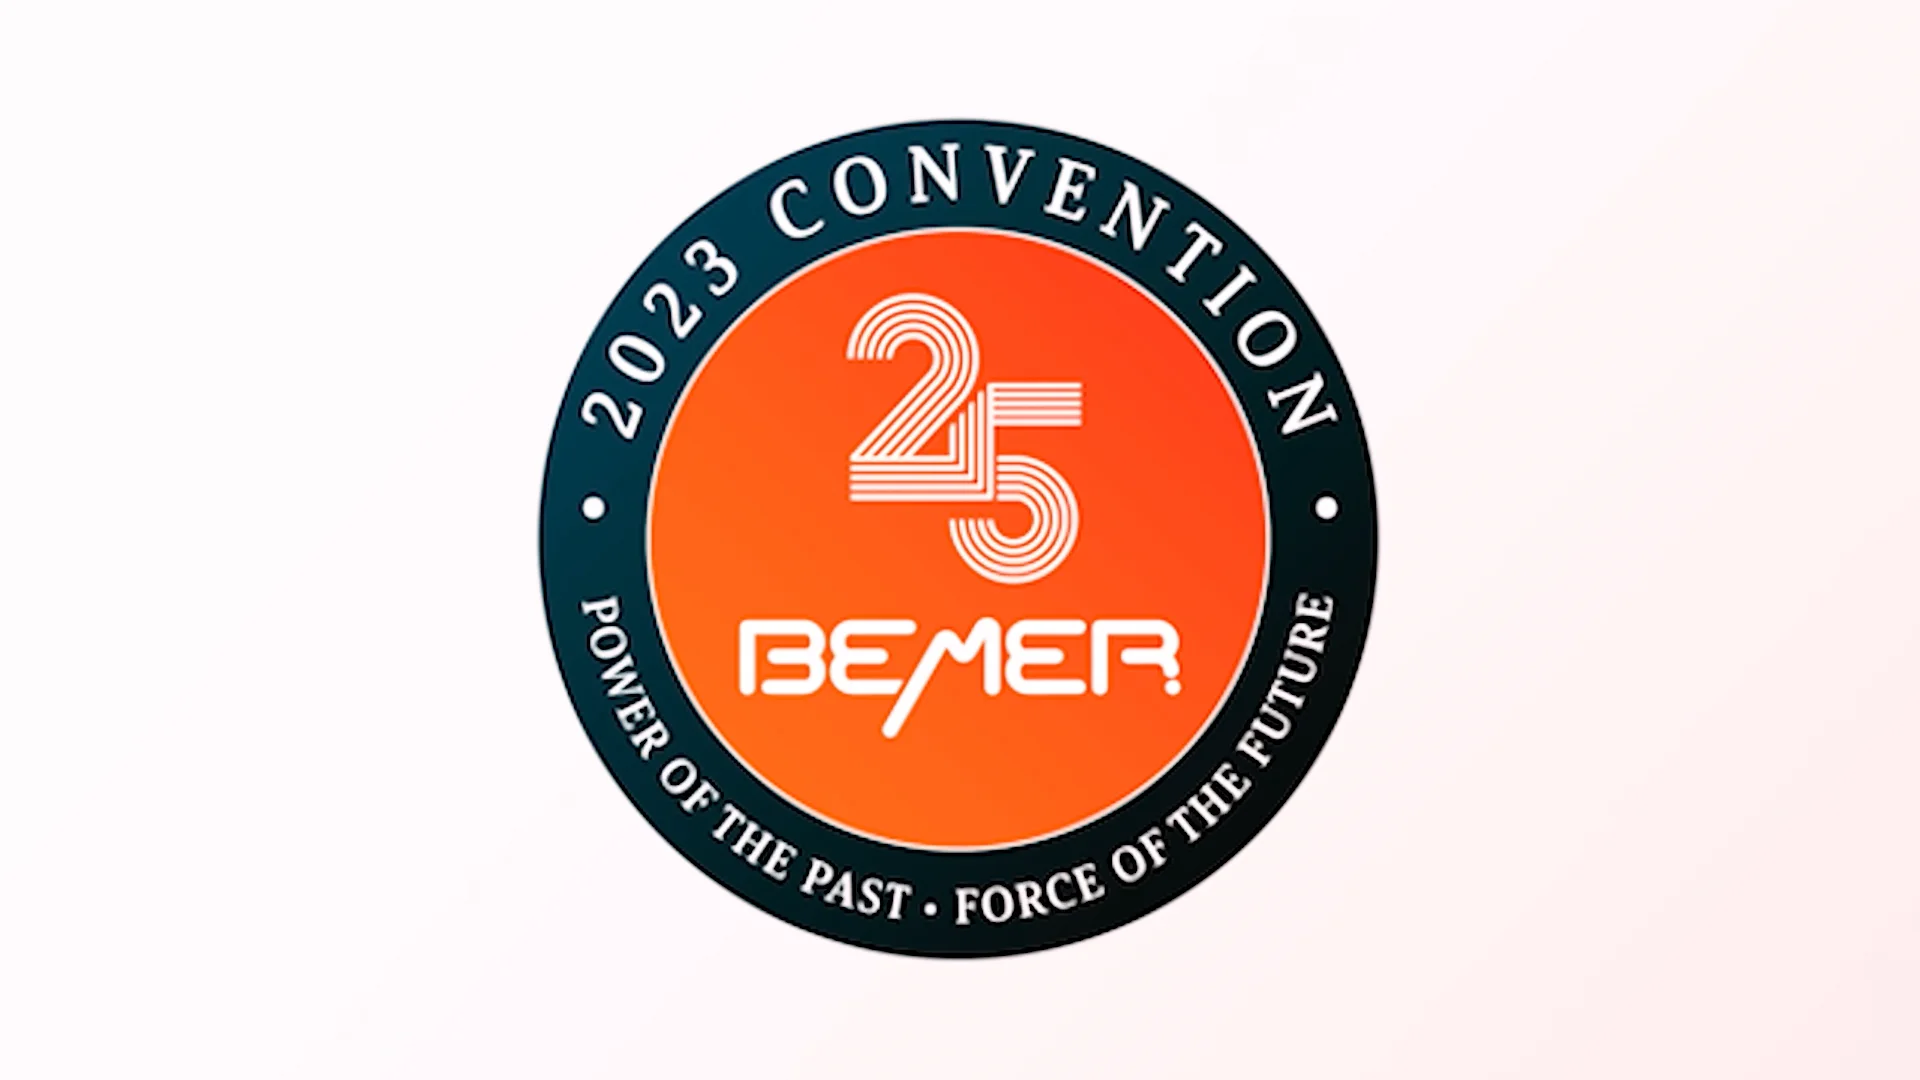 Bemer Convention Video on Vimeo